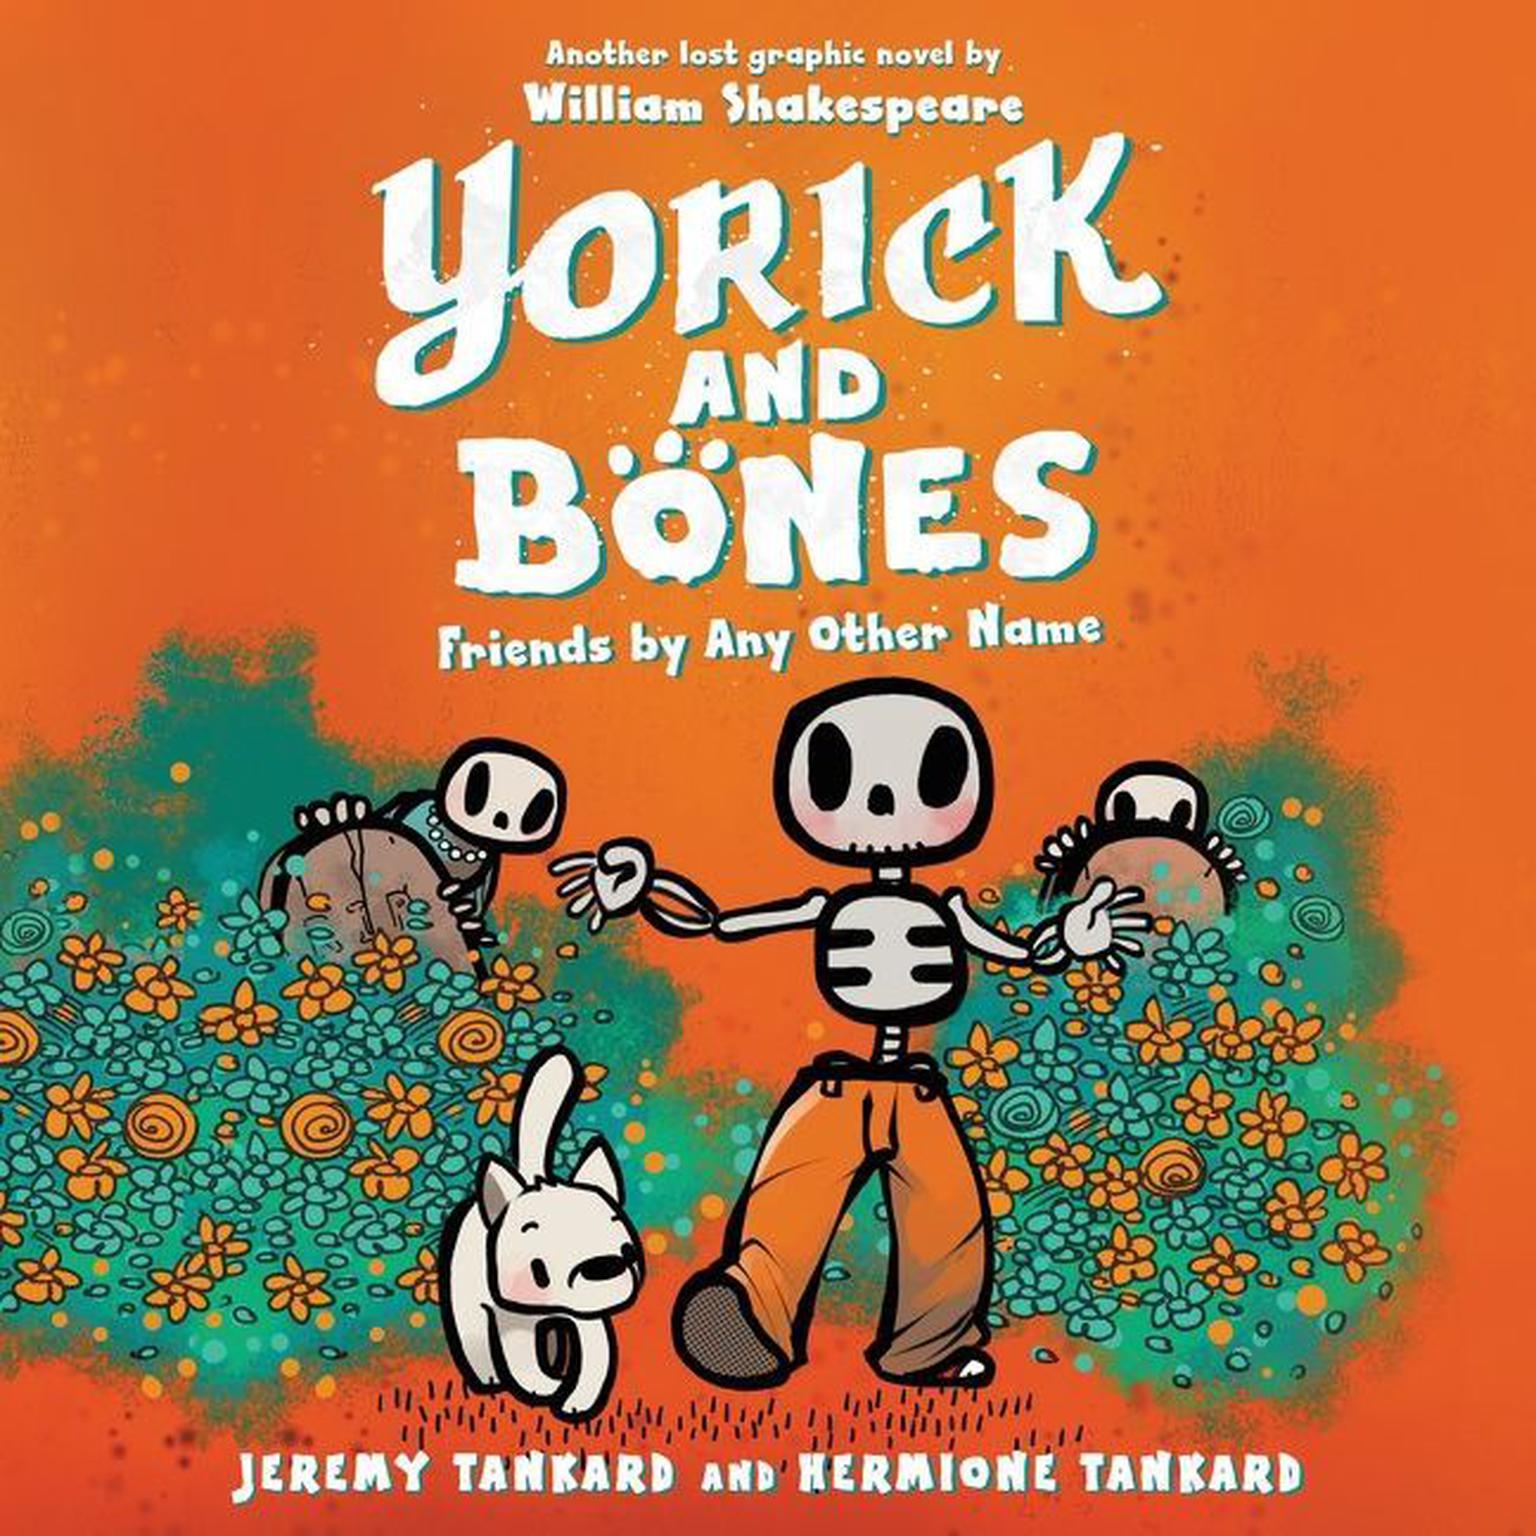 Yorick and Bones: Friends by Any Other Name Audiobook, by Hermione Tankard